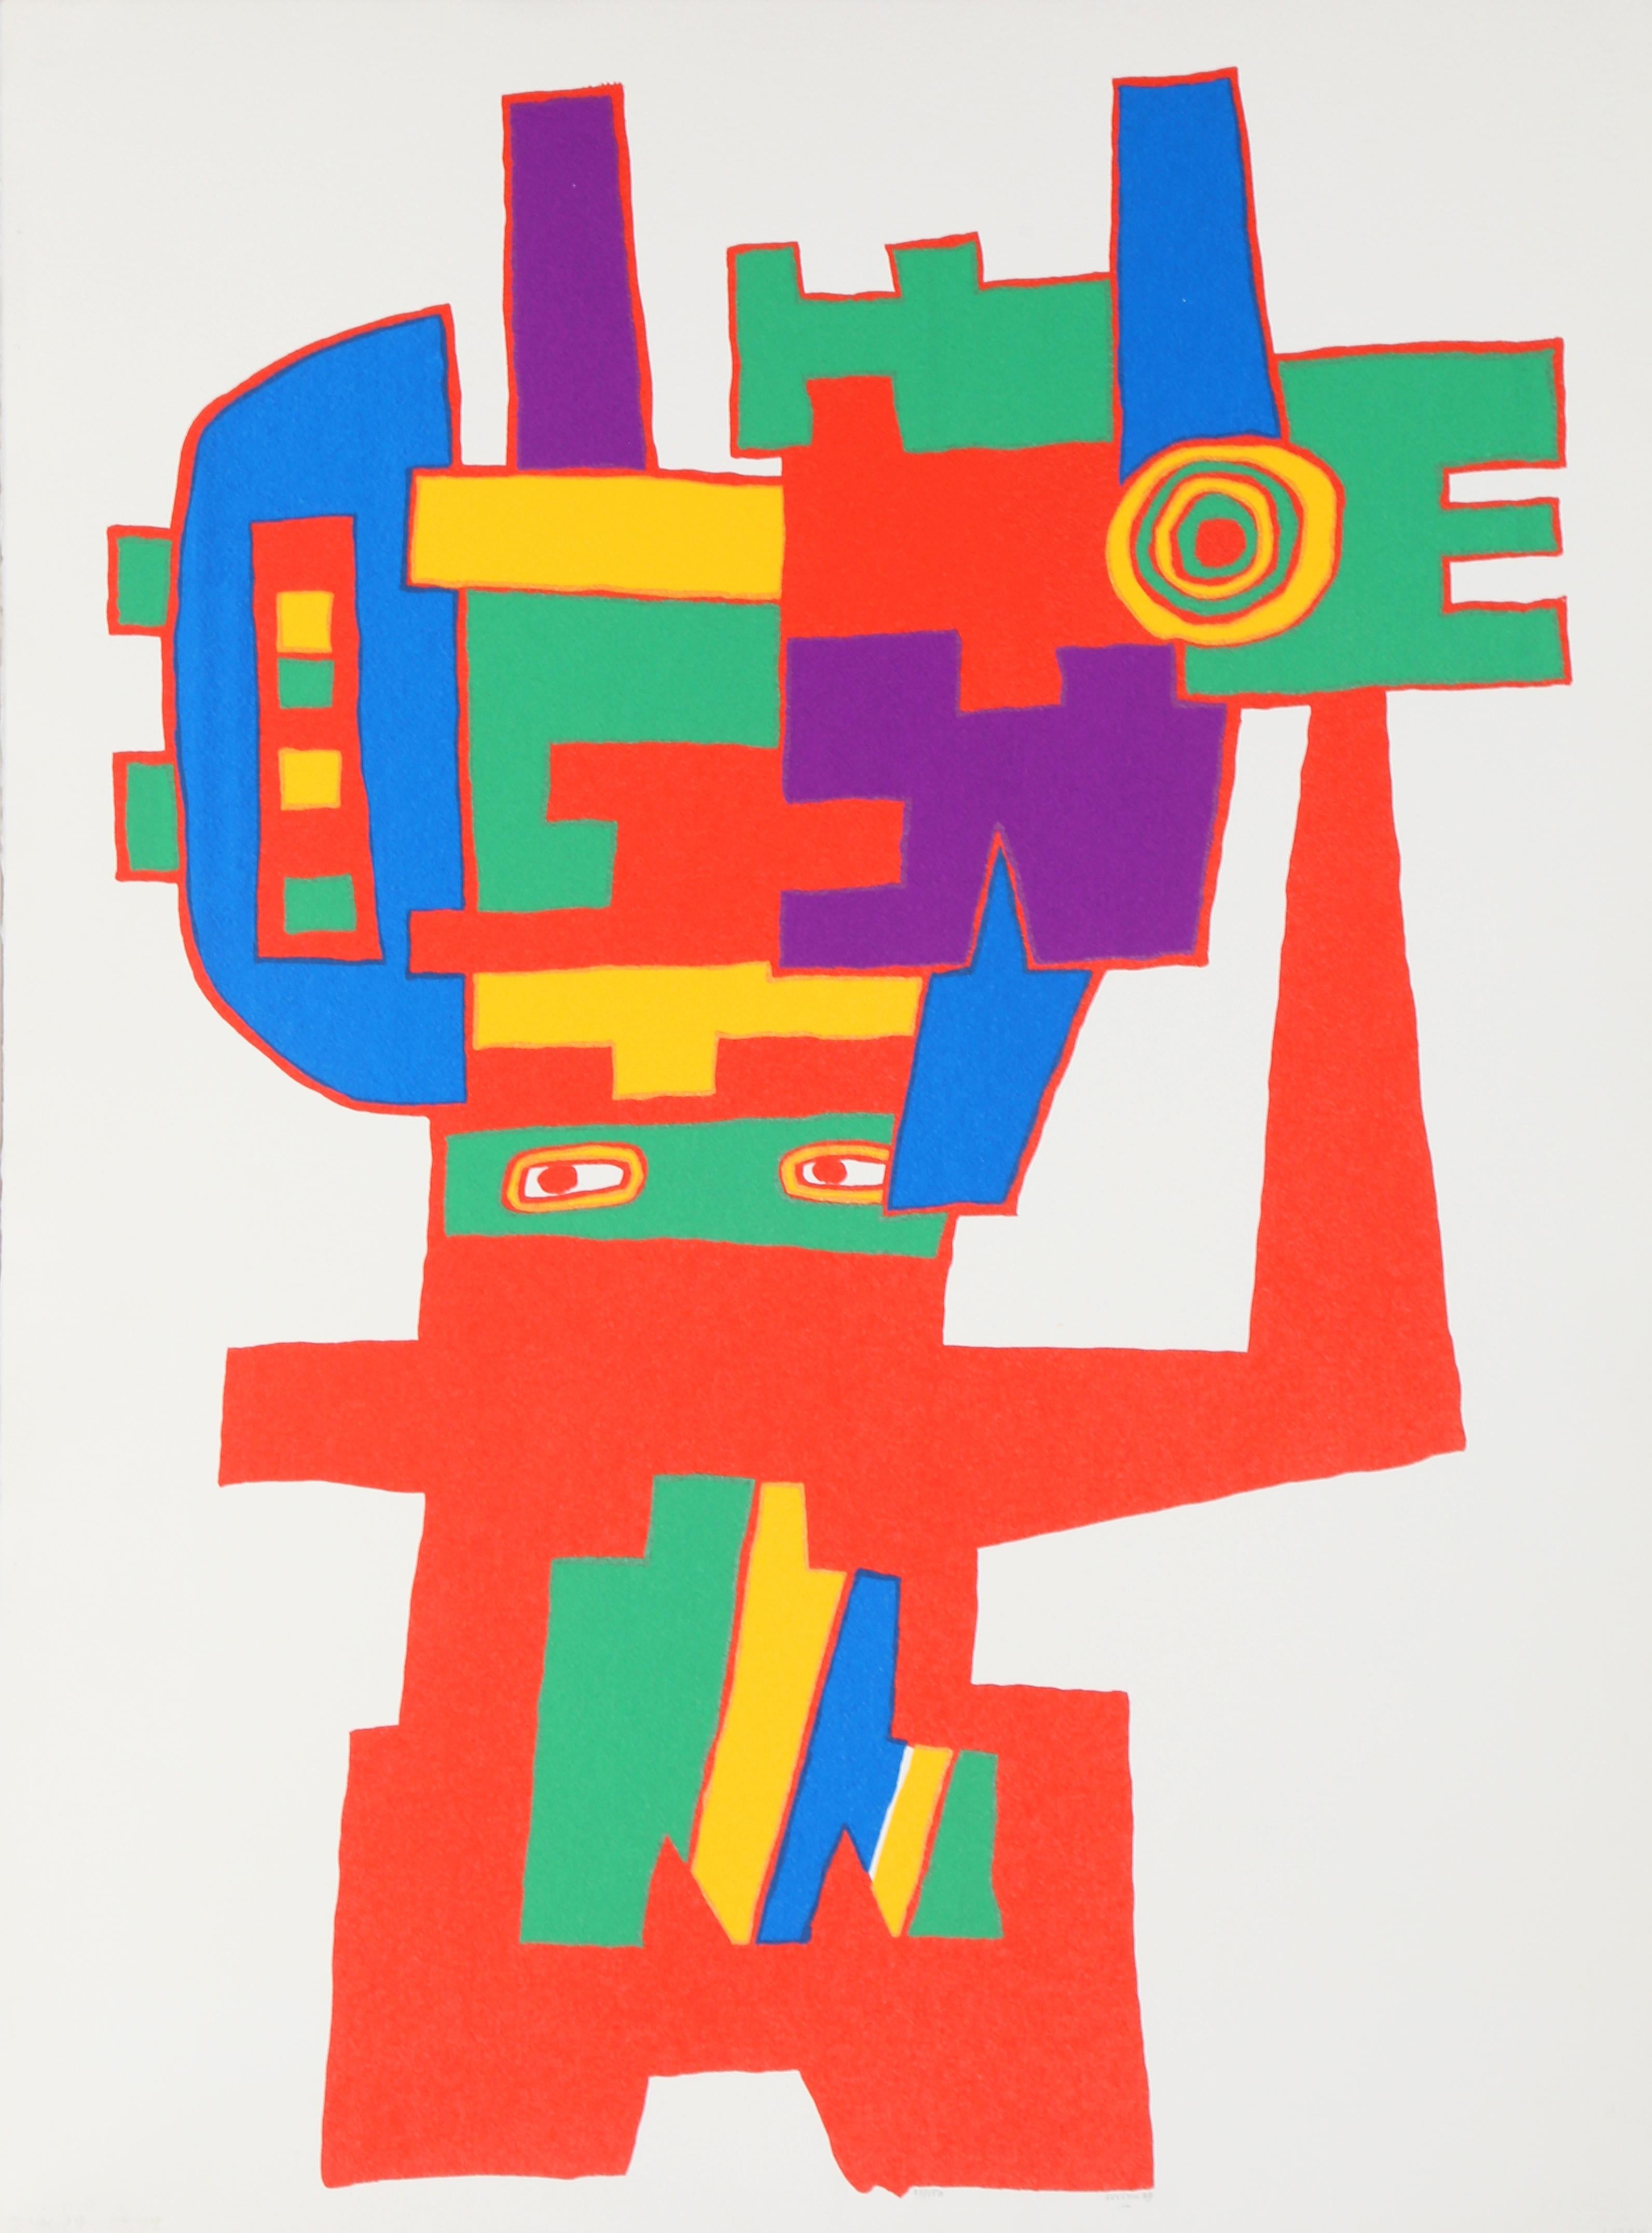 Artist: Jacques Soisson
Title: Untitled - Camera Man
Year: 1975
Medium: Serigraph, signed and numbered in pencil
Edition: 150
Paper Size: 30.5 x 24.5 inches